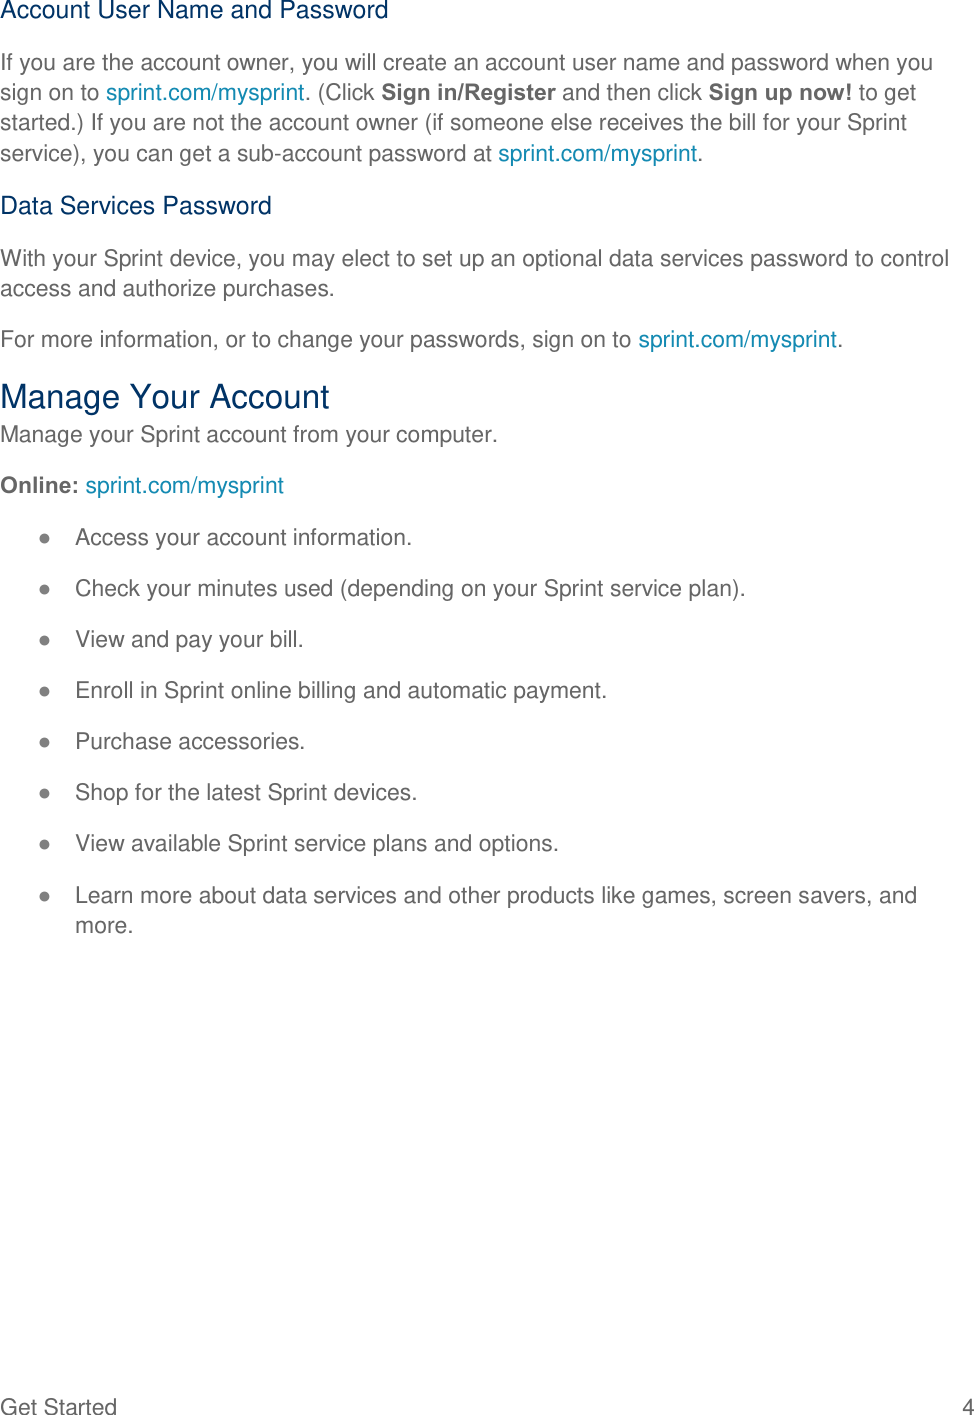  Get Started  4 Account User Name and Password If you are the account owner, you will create an account user name and password when you sign on to sprint.com/mysprint. (Click Sign in/Register and then click Sign up now! to get started.) If you are not the account owner (if someone else receives the bill for your Sprint service), you can get a sub-account password at sprint.com/mysprint. Data Services Password With your Sprint device, you may elect to set up an optional data services password to control access and authorize purchases. For more information, or to change your passwords, sign on to sprint.com/mysprint. Manage Your Account Manage your Sprint account from your computer. Online: sprint.com/mysprint ● Access your account information. ● Check your minutes used (depending on your Sprint service plan). ● View and pay your bill. ● Enroll in Sprint online billing and automatic payment. ● Purchase accessories. ● Shop for the latest Sprint devices. ● View available Sprint service plans and options. ● Learn more about data services and other products like games, screen savers, and more. 